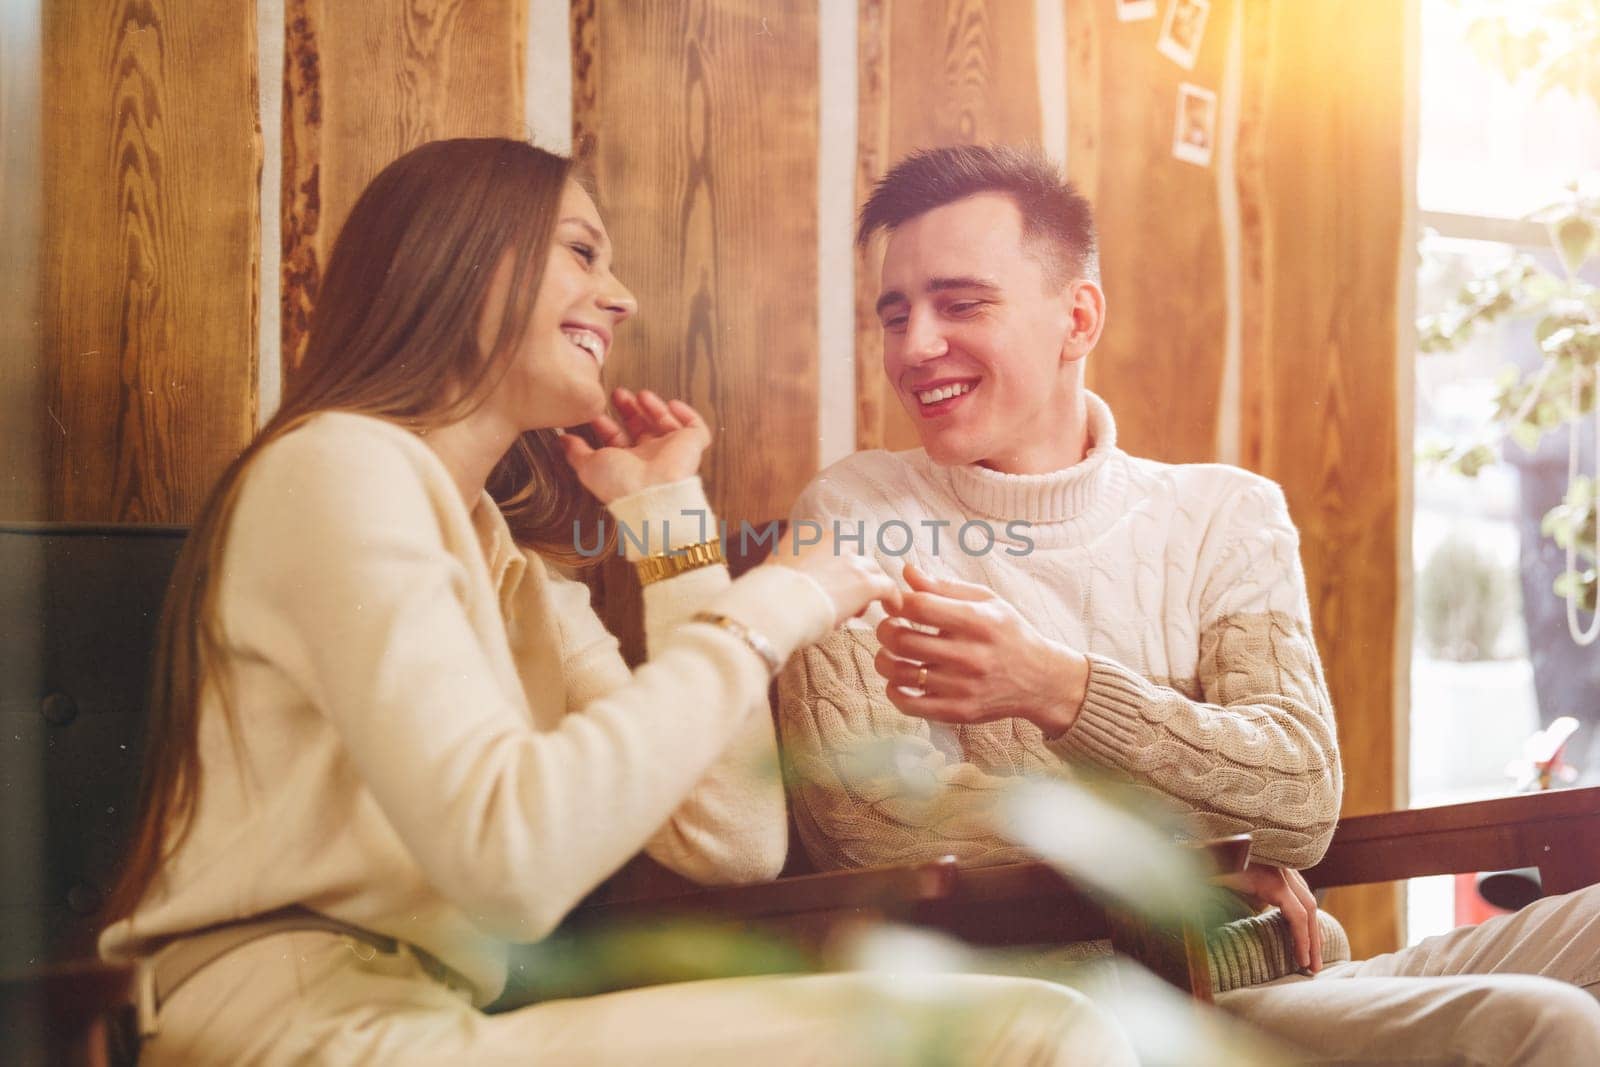 A young man and woman share a joyful moment while sitting at a wooden table in a cafe with a warmly lit interior. They are both smiling and seem to be engaged in a relaxed and friendly conversation. Natural light streams in from the side, highlighting their casual clothing and the intimate setting.